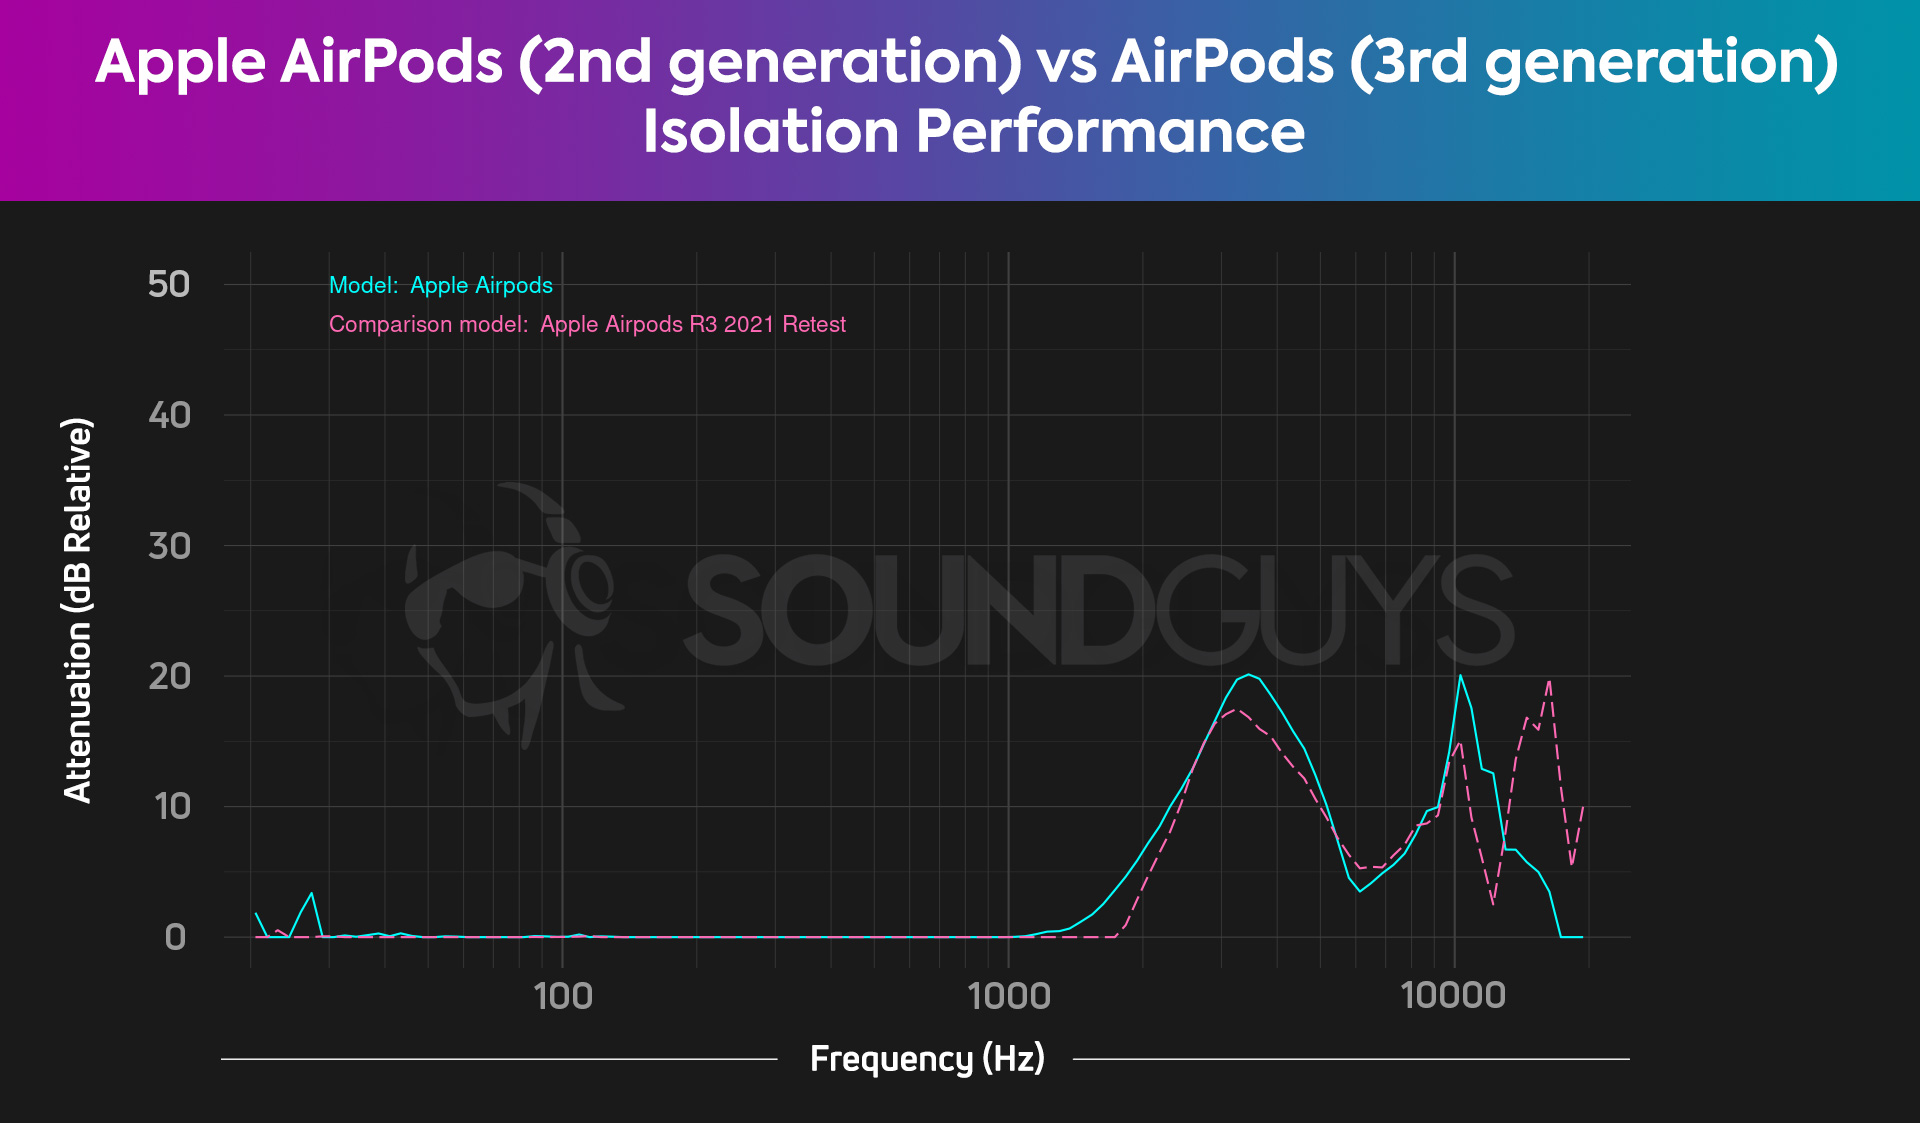 A chart compares the Apple AirPods (2nd generation) vs Apple AirPods (3rd generation) isolation performances, both of which are poor.